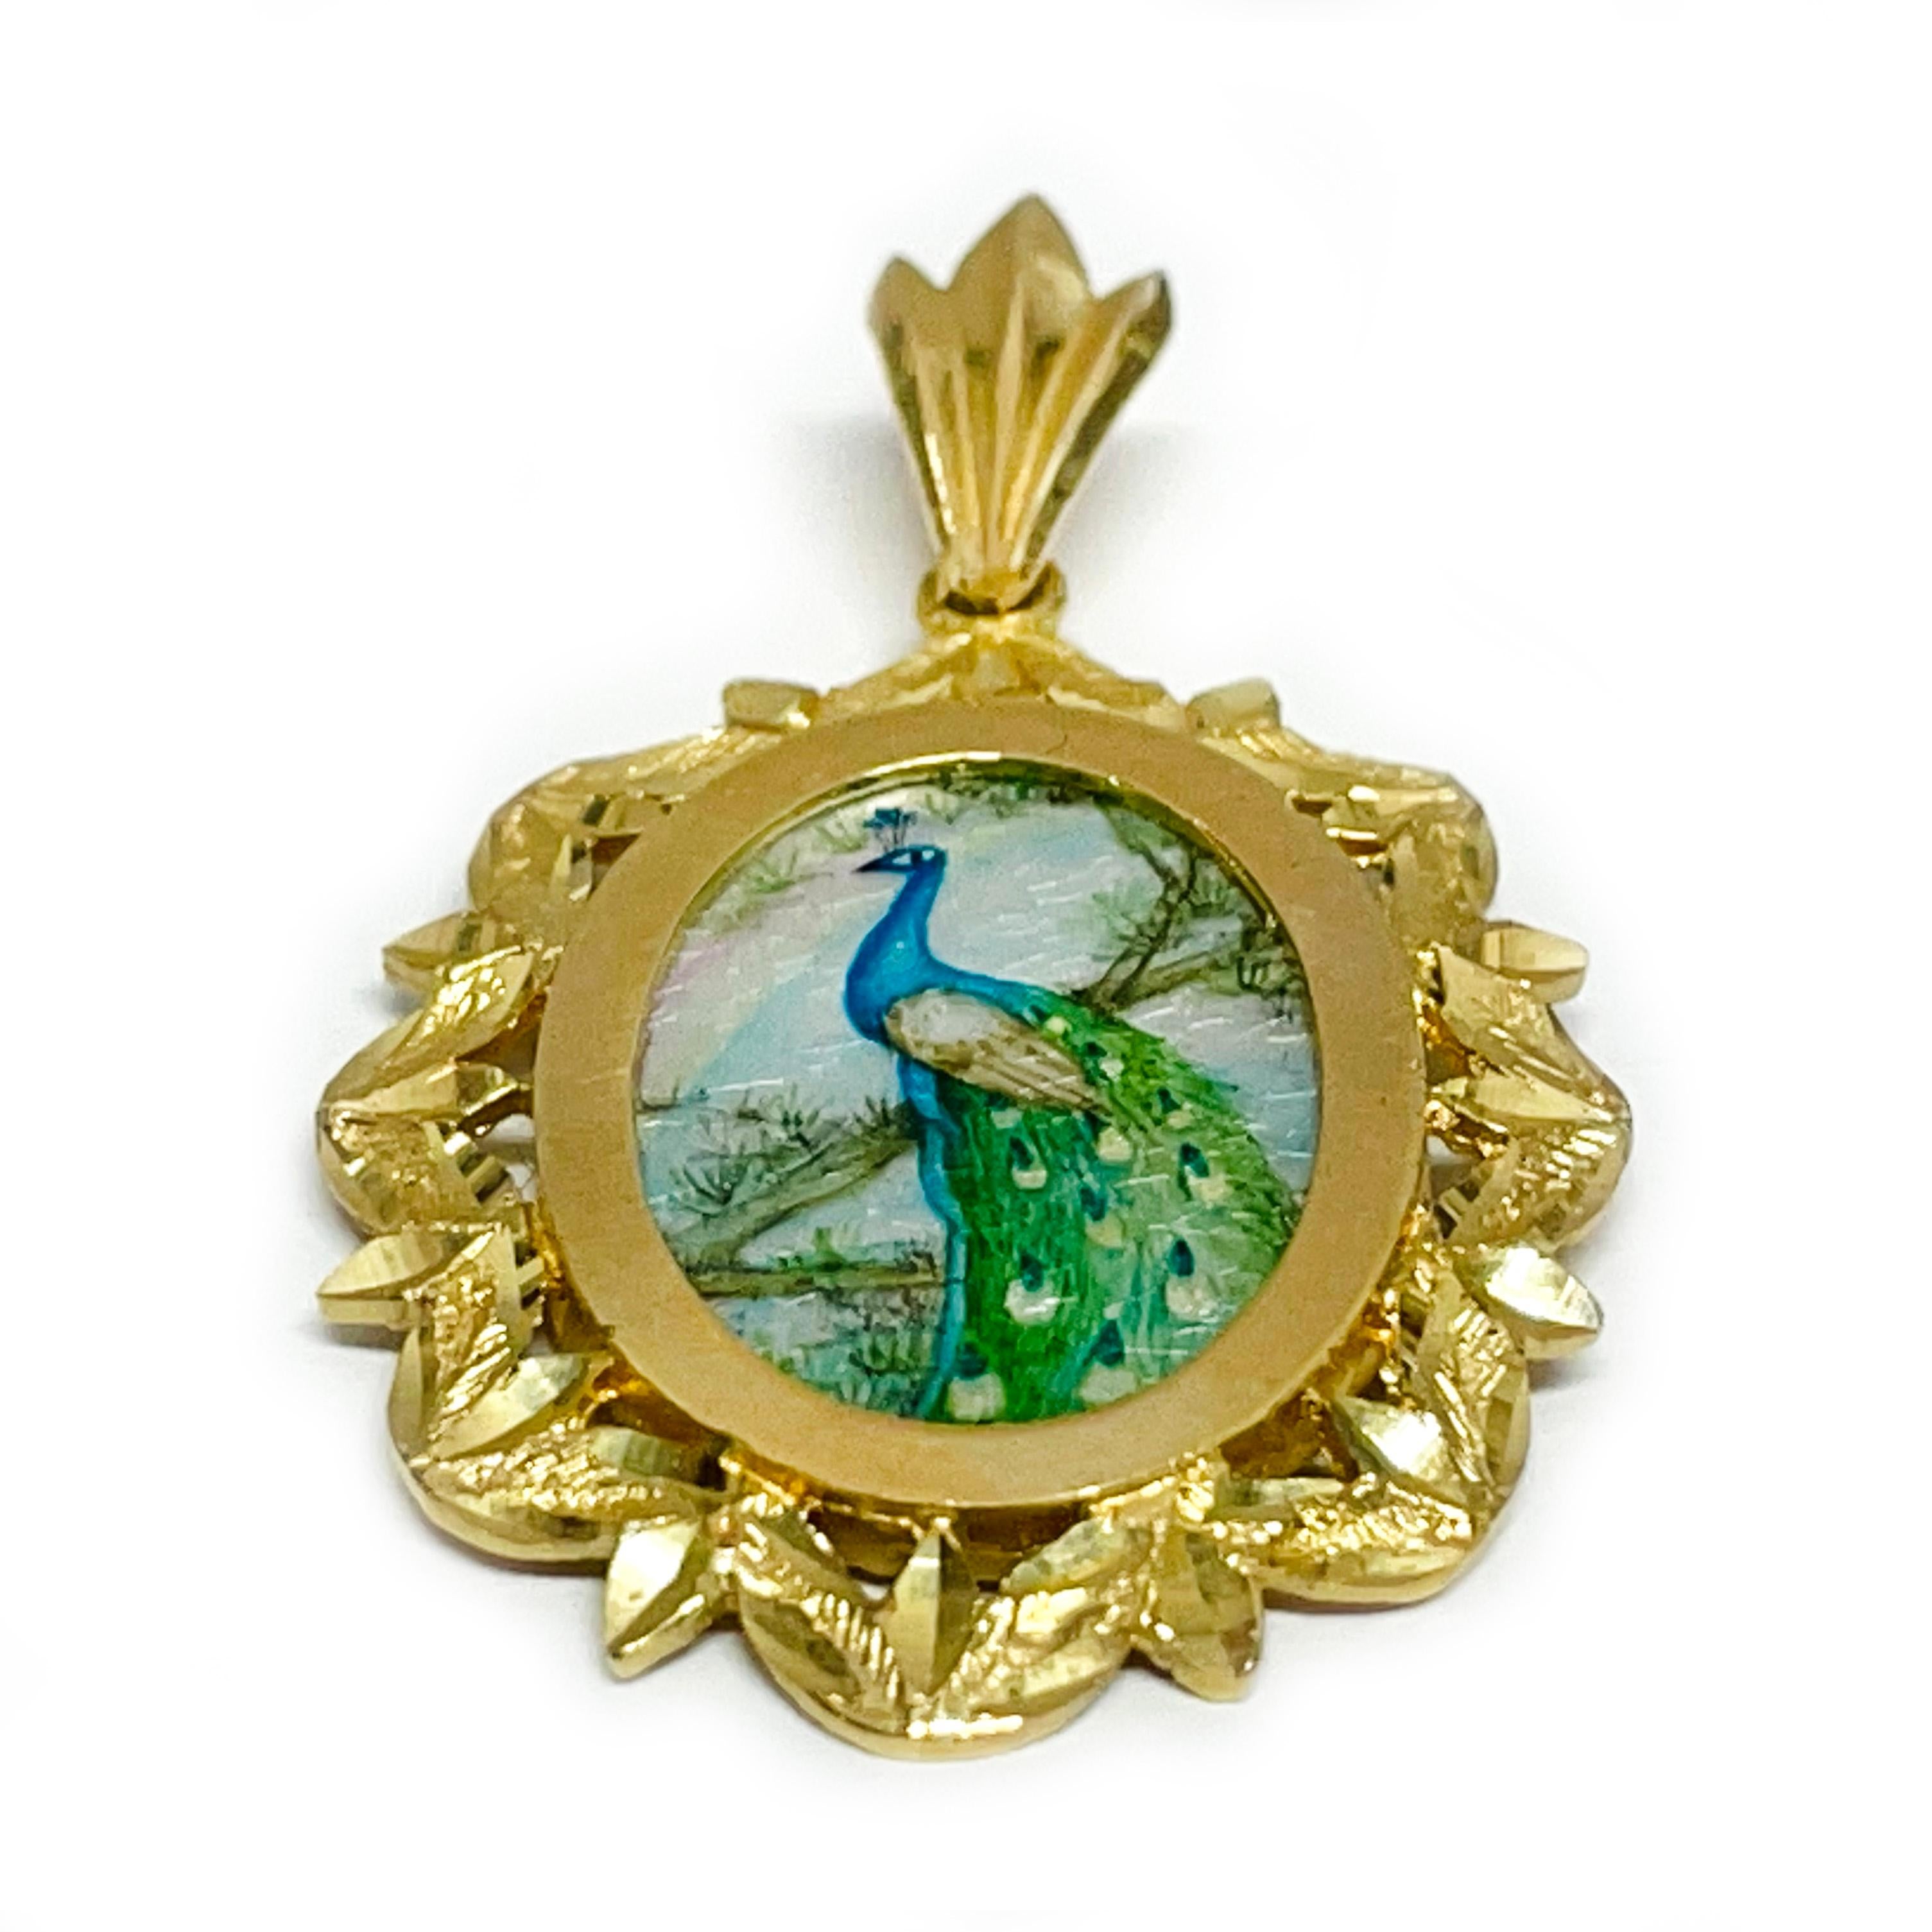 14 Karat Yellow Gold Peacock Hand Painted on a Mother of Pearl Pendant. The miniature painting is set in a 14 karat gold ornate oval frame with diamond-cut details. The painting is signed by the master artist, Luo-Afi-Ping and includes a